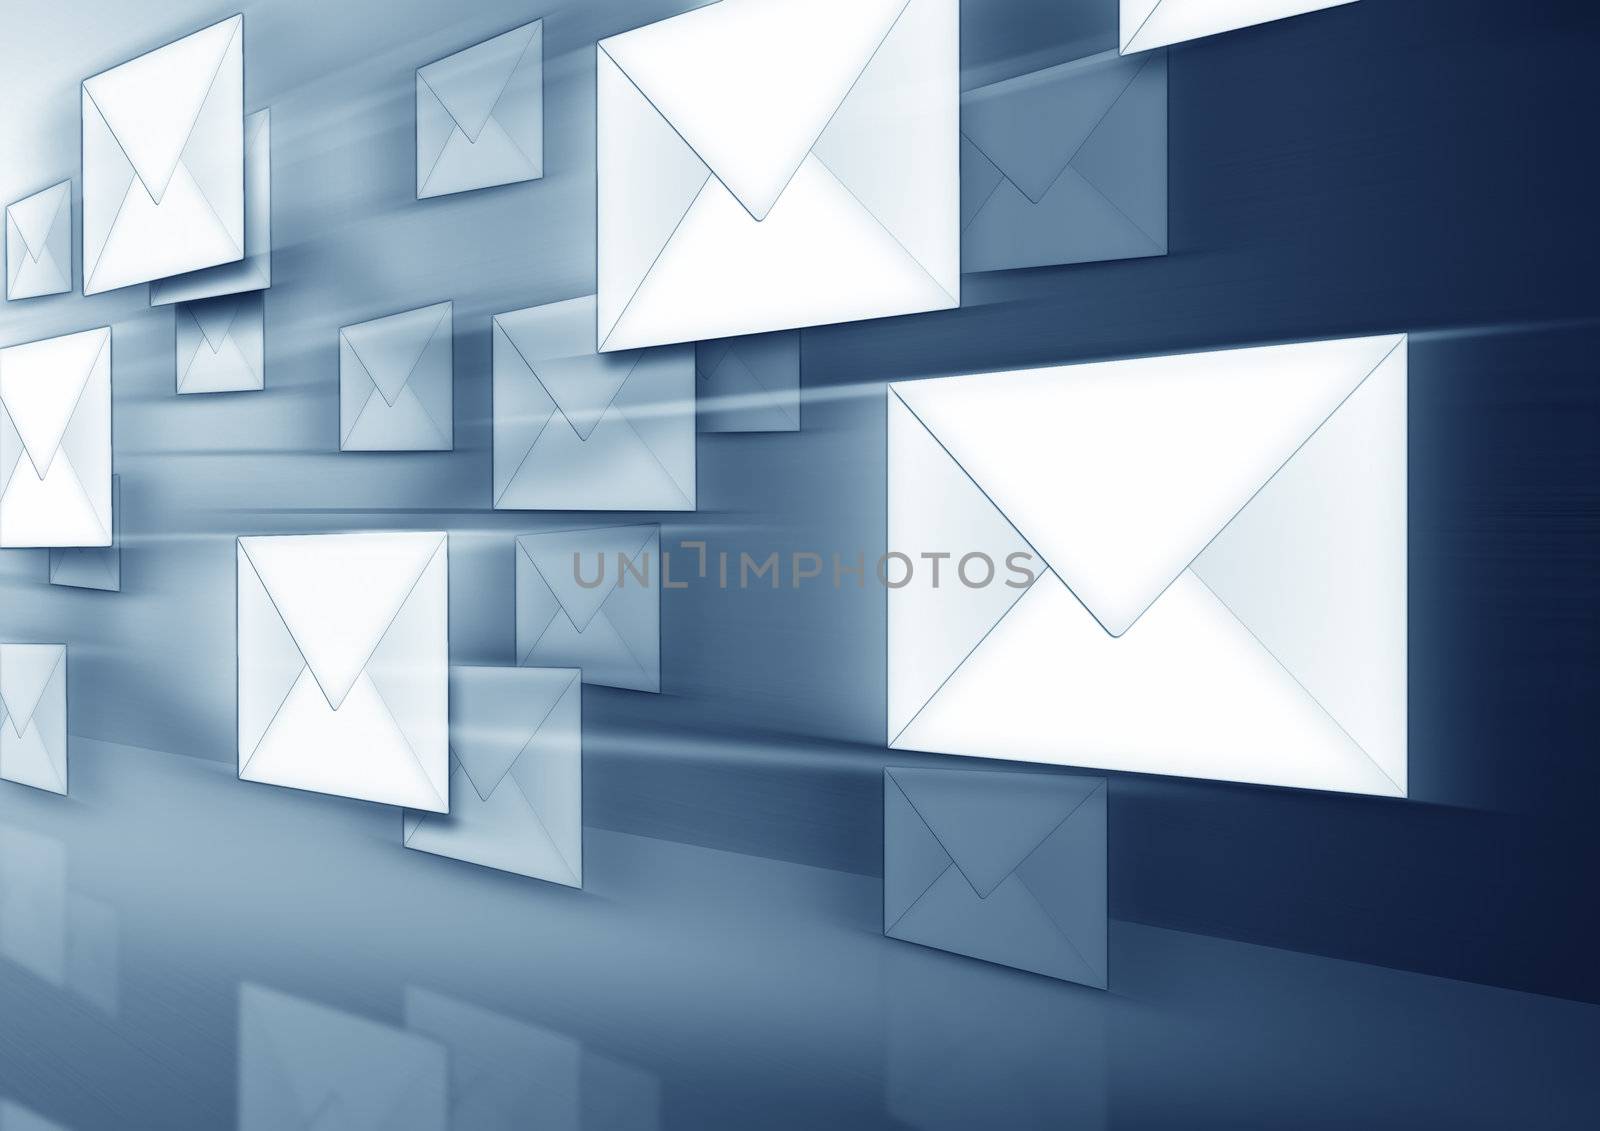 An image of some flying envelopes